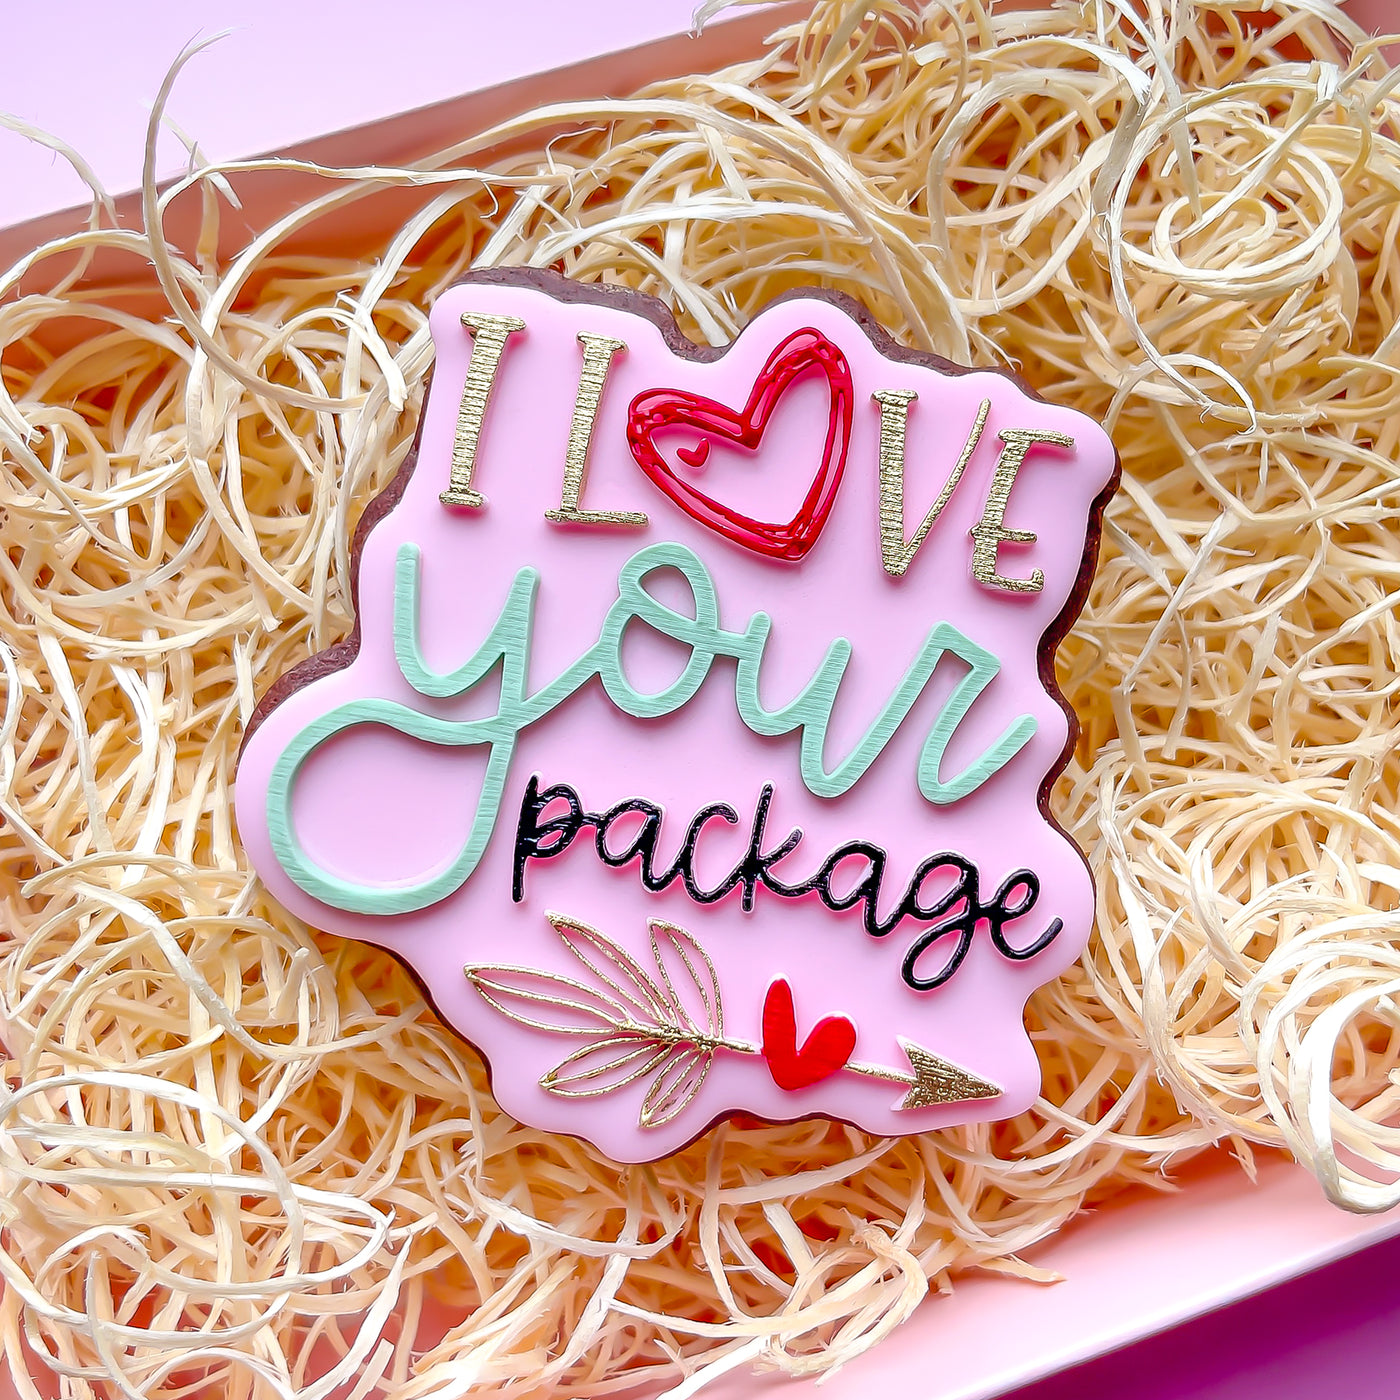 I Love Your Package